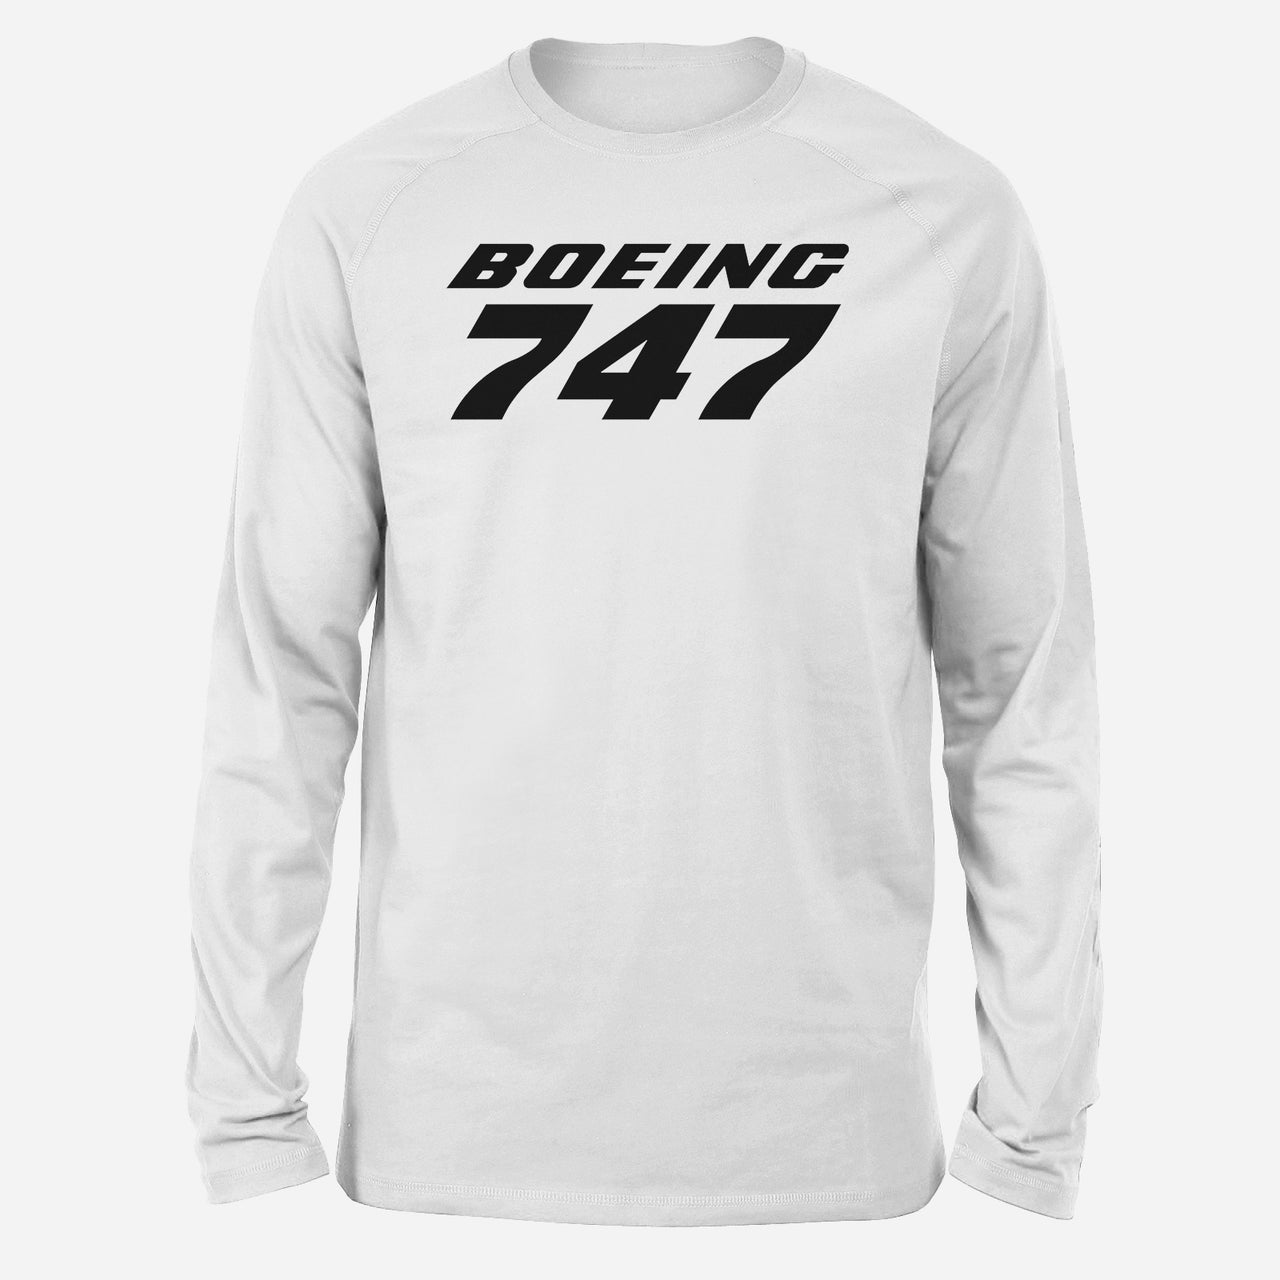 Boeing 747 & Text Designed Long-Sleeve T-Shirts